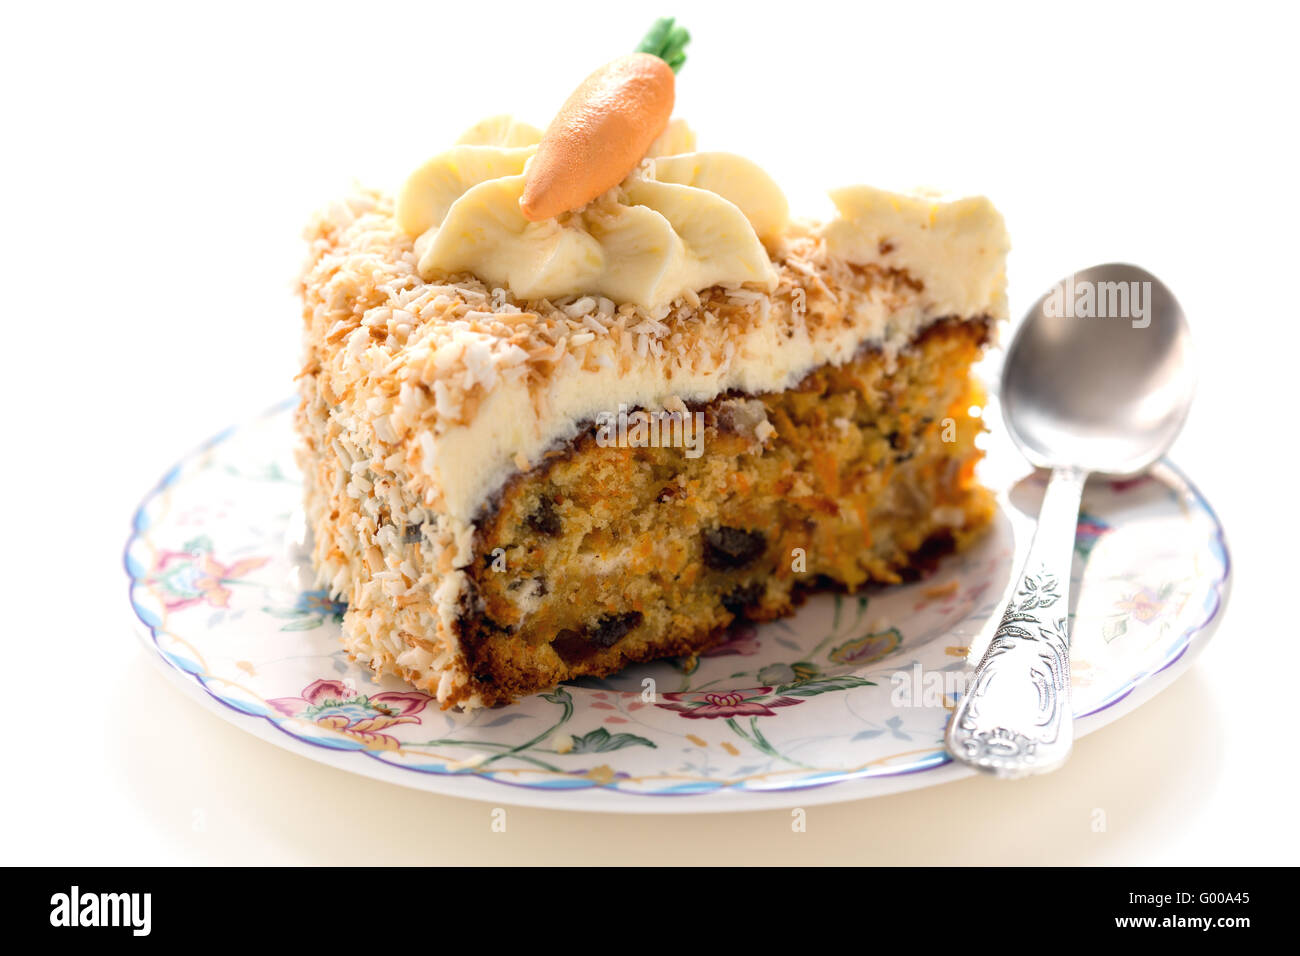 Carrot cake on a plate. Stock Photo